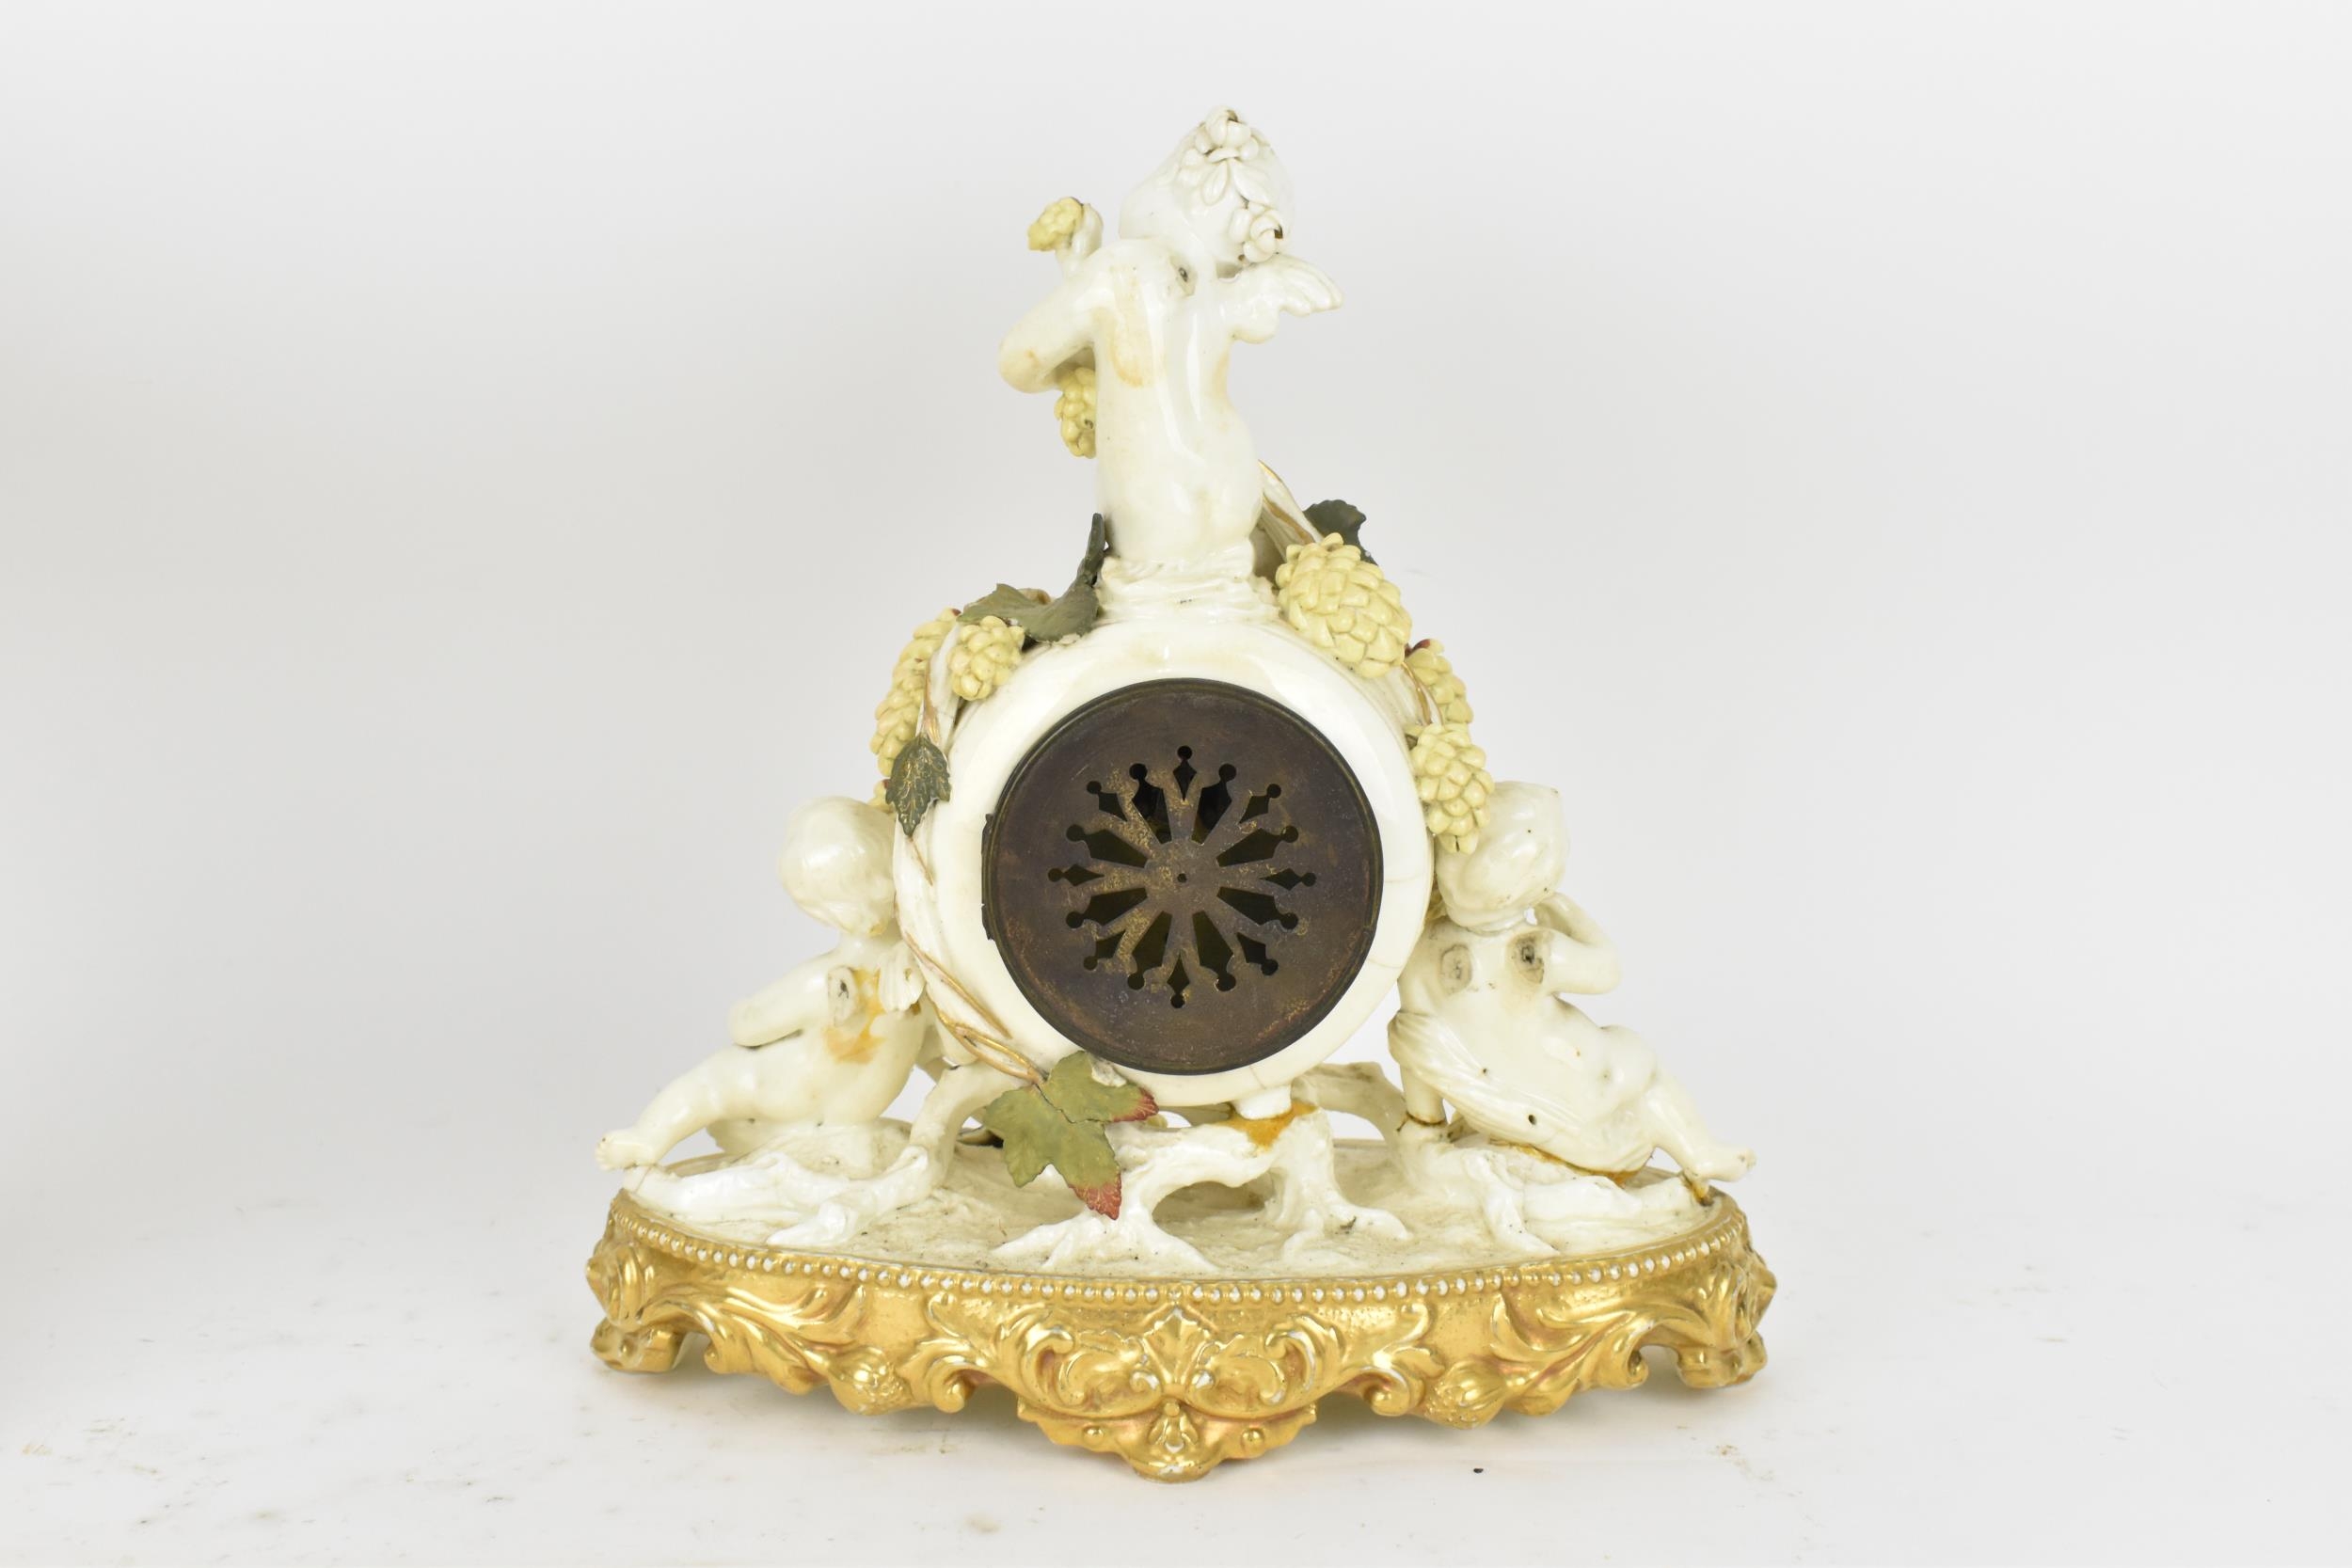 A late 19th century porcelain mantle clock, decorated with cherubs eating grapes on a gilded base, - Image 2 of 7